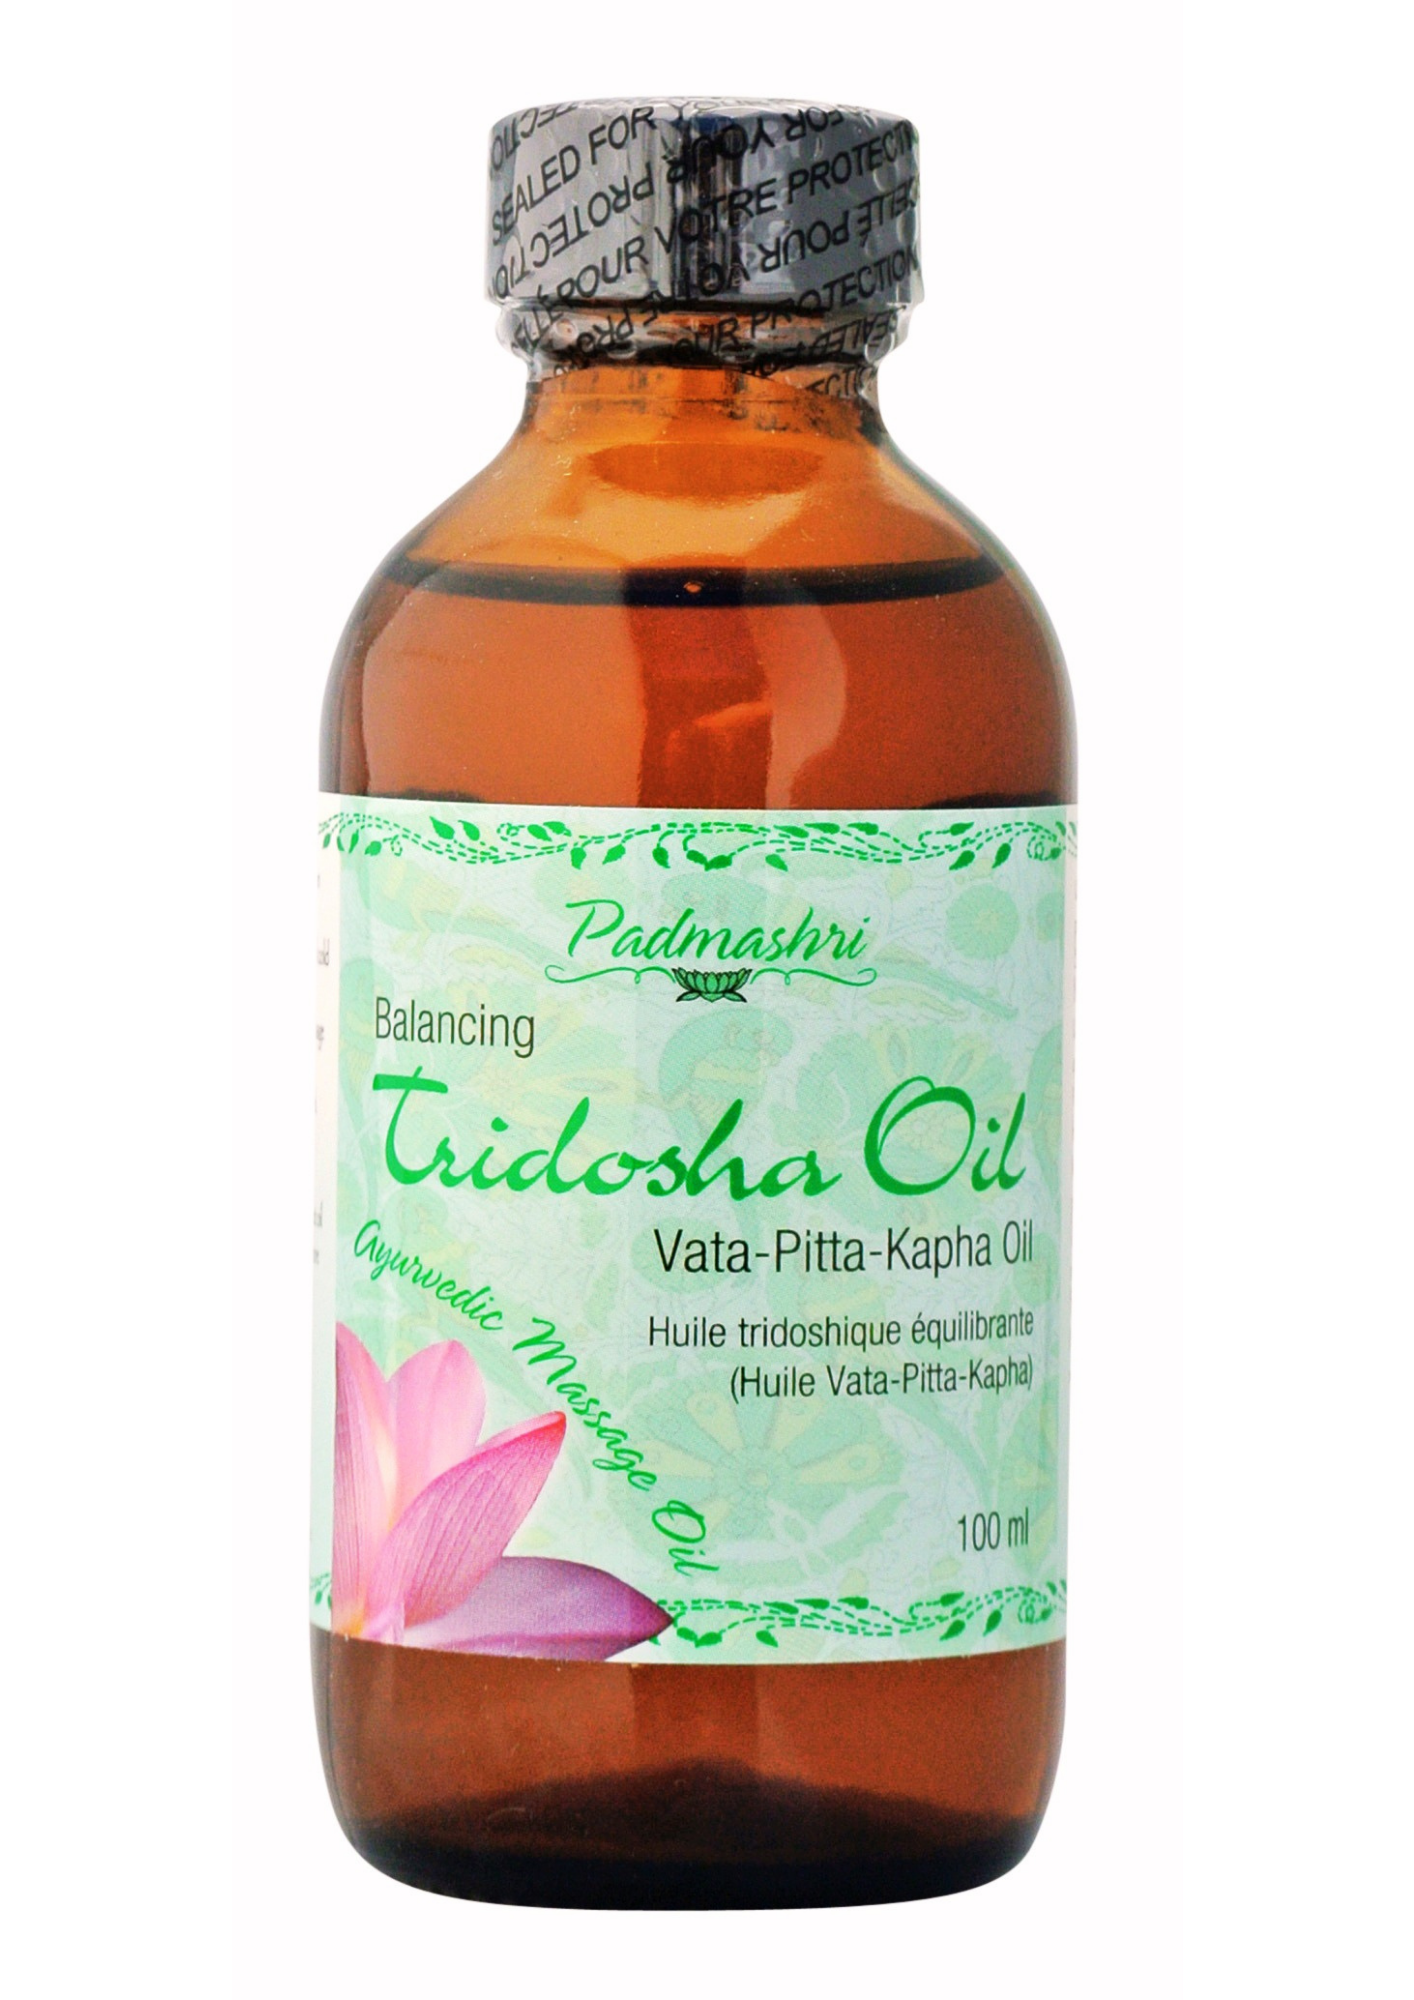 Ayurvedic Tridosha Massage Oil - This oil nourishes the tissues, cares for the skin, balances, calms, and is lightly warming. It can be used by all types of the constitution for body massage and as a bath oil. It is mainly for those who are already balanced and want to remain so or those who are not sure what type of constitution they are.